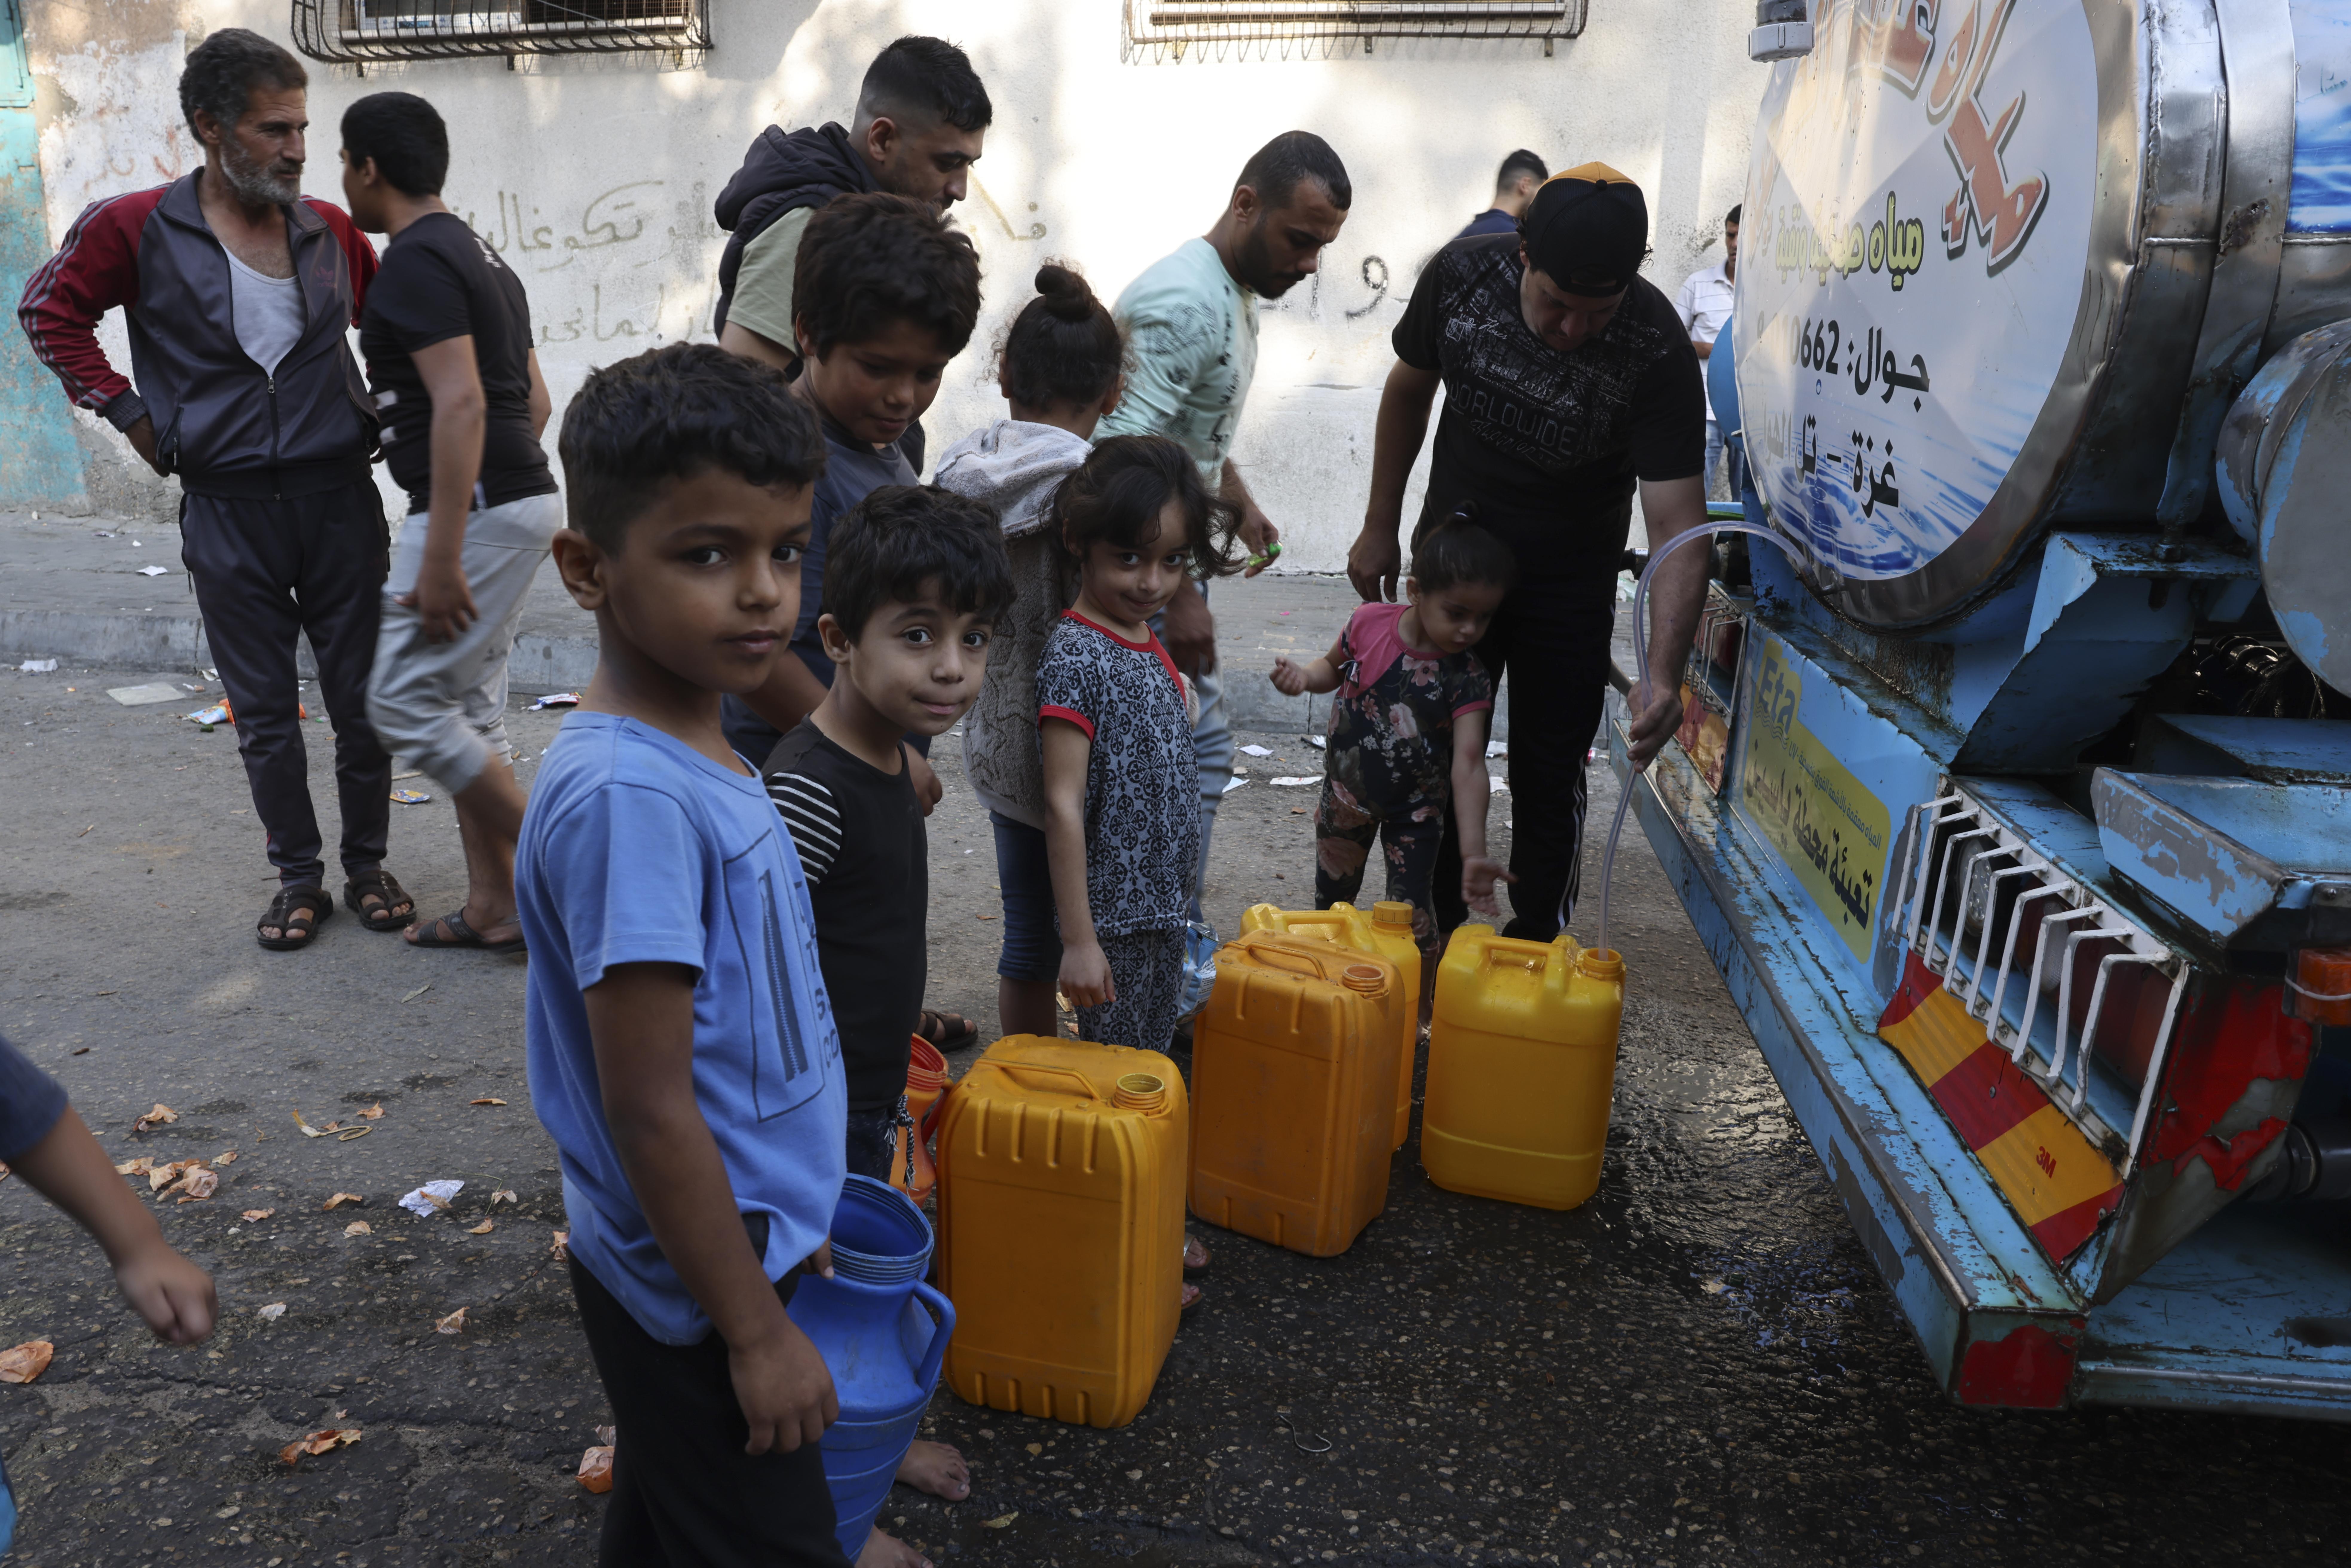 Images showing Gaza population seeking water in tanker trucks after the total shutdown of water and electricity.